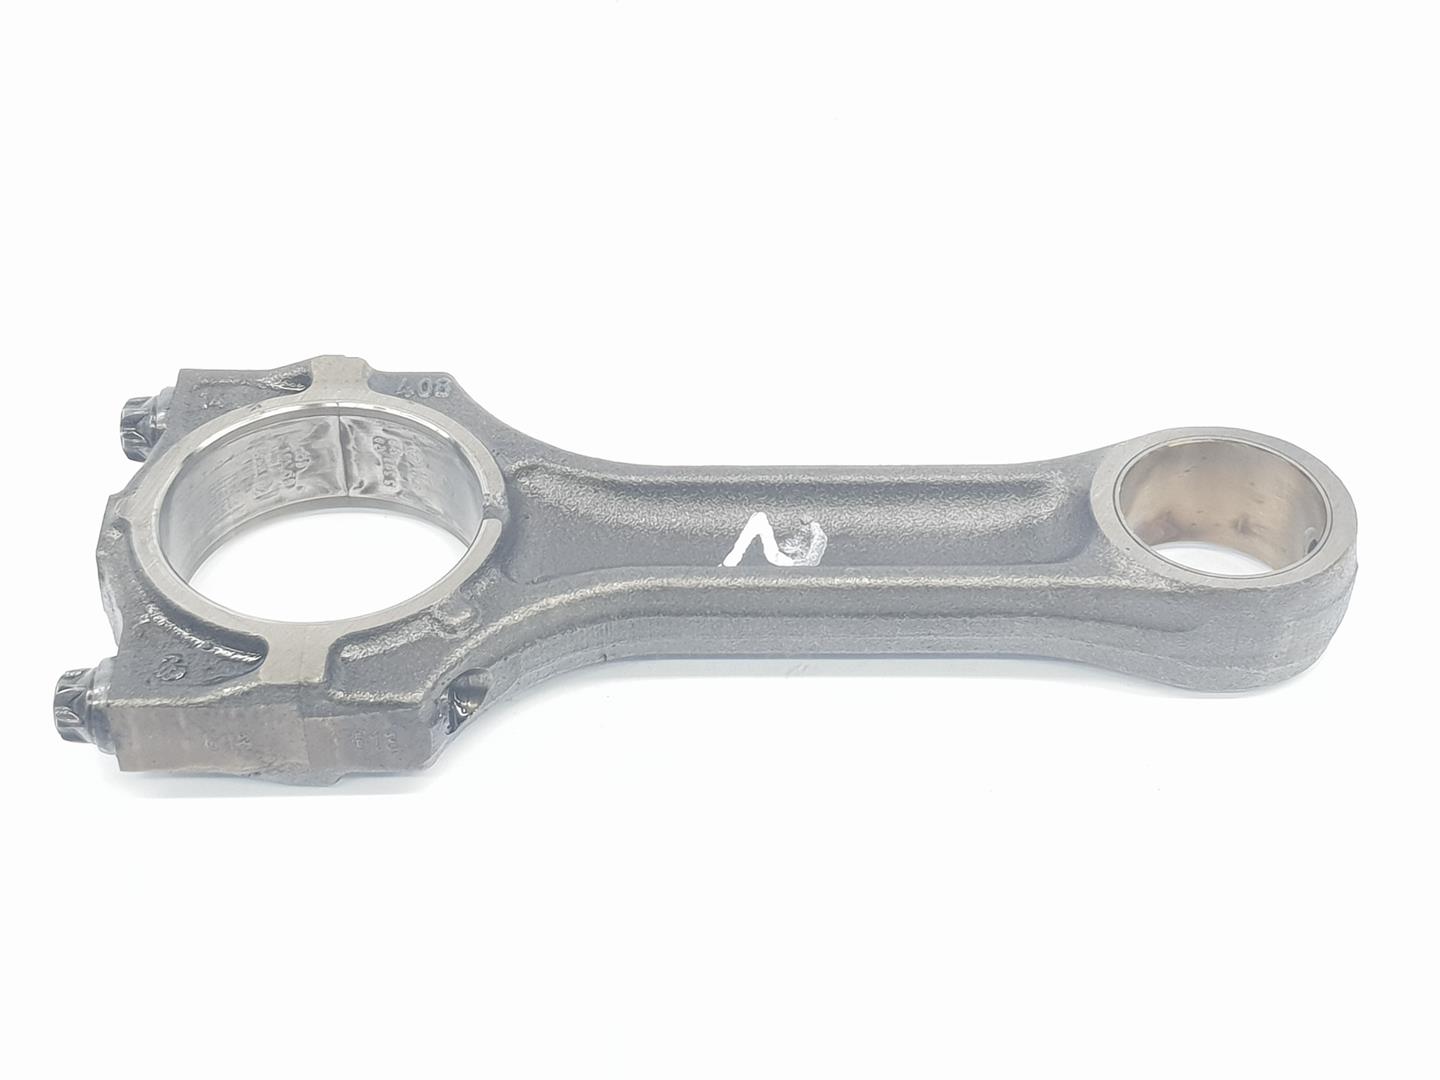 BMW 3 Series E46 (1997-2006) Connecting Rod 11247805253, 11247805253, 1111AA 24233041